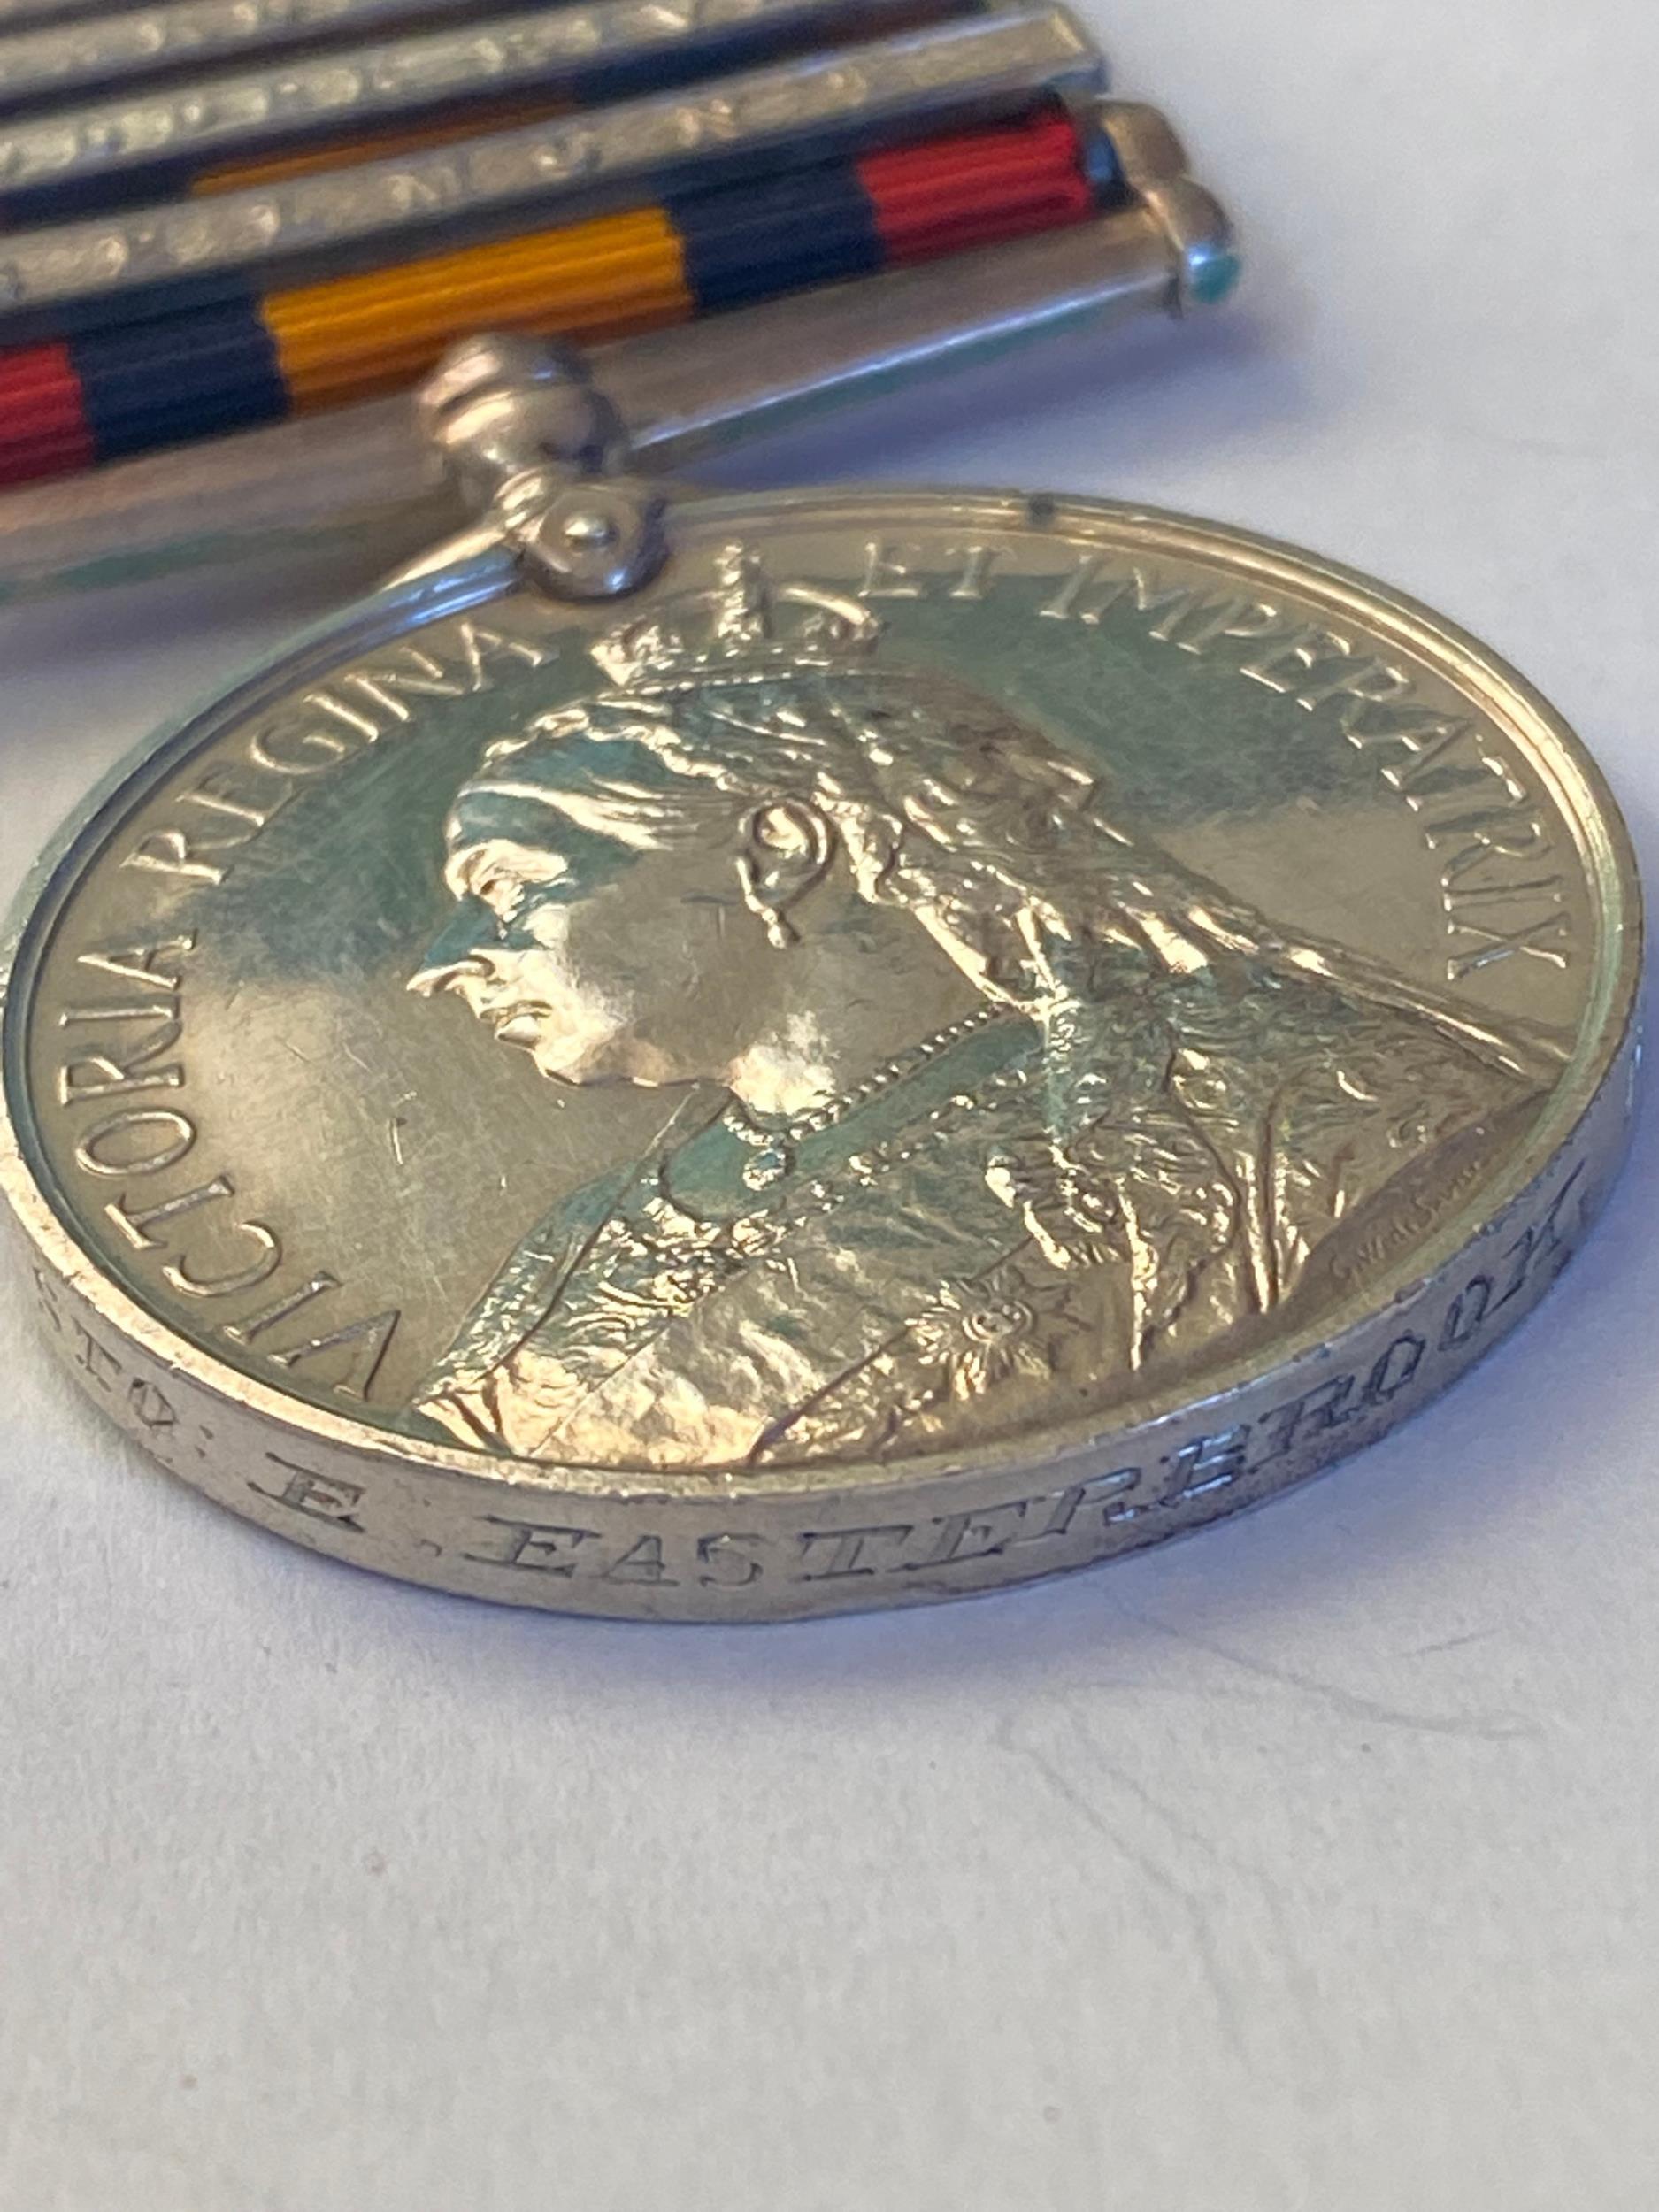 A FOUR CLASP QUEEN'S SOUTH AFRICA MEDAL TO A FIRST WORLD WAR CASUALTY AT JUTLAND. - Image 4 of 12